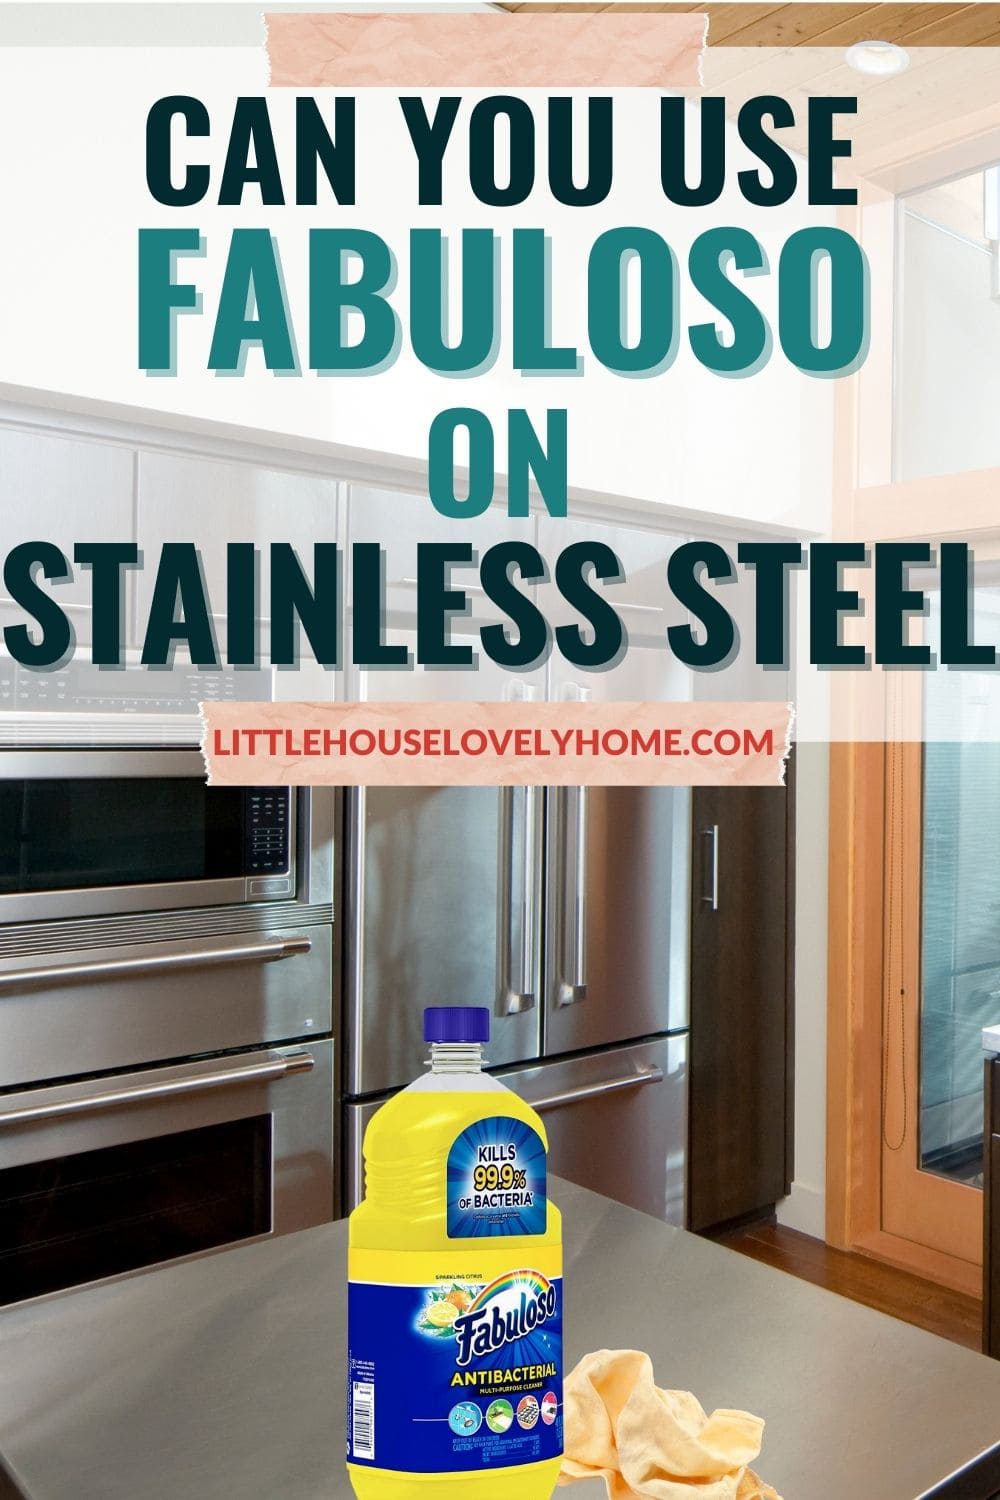 Image of kitchen made mostly with stainless steel and yellow FAbuloso on the stainless table with text over lay that reads Can you use Fabuloso on stainless steel